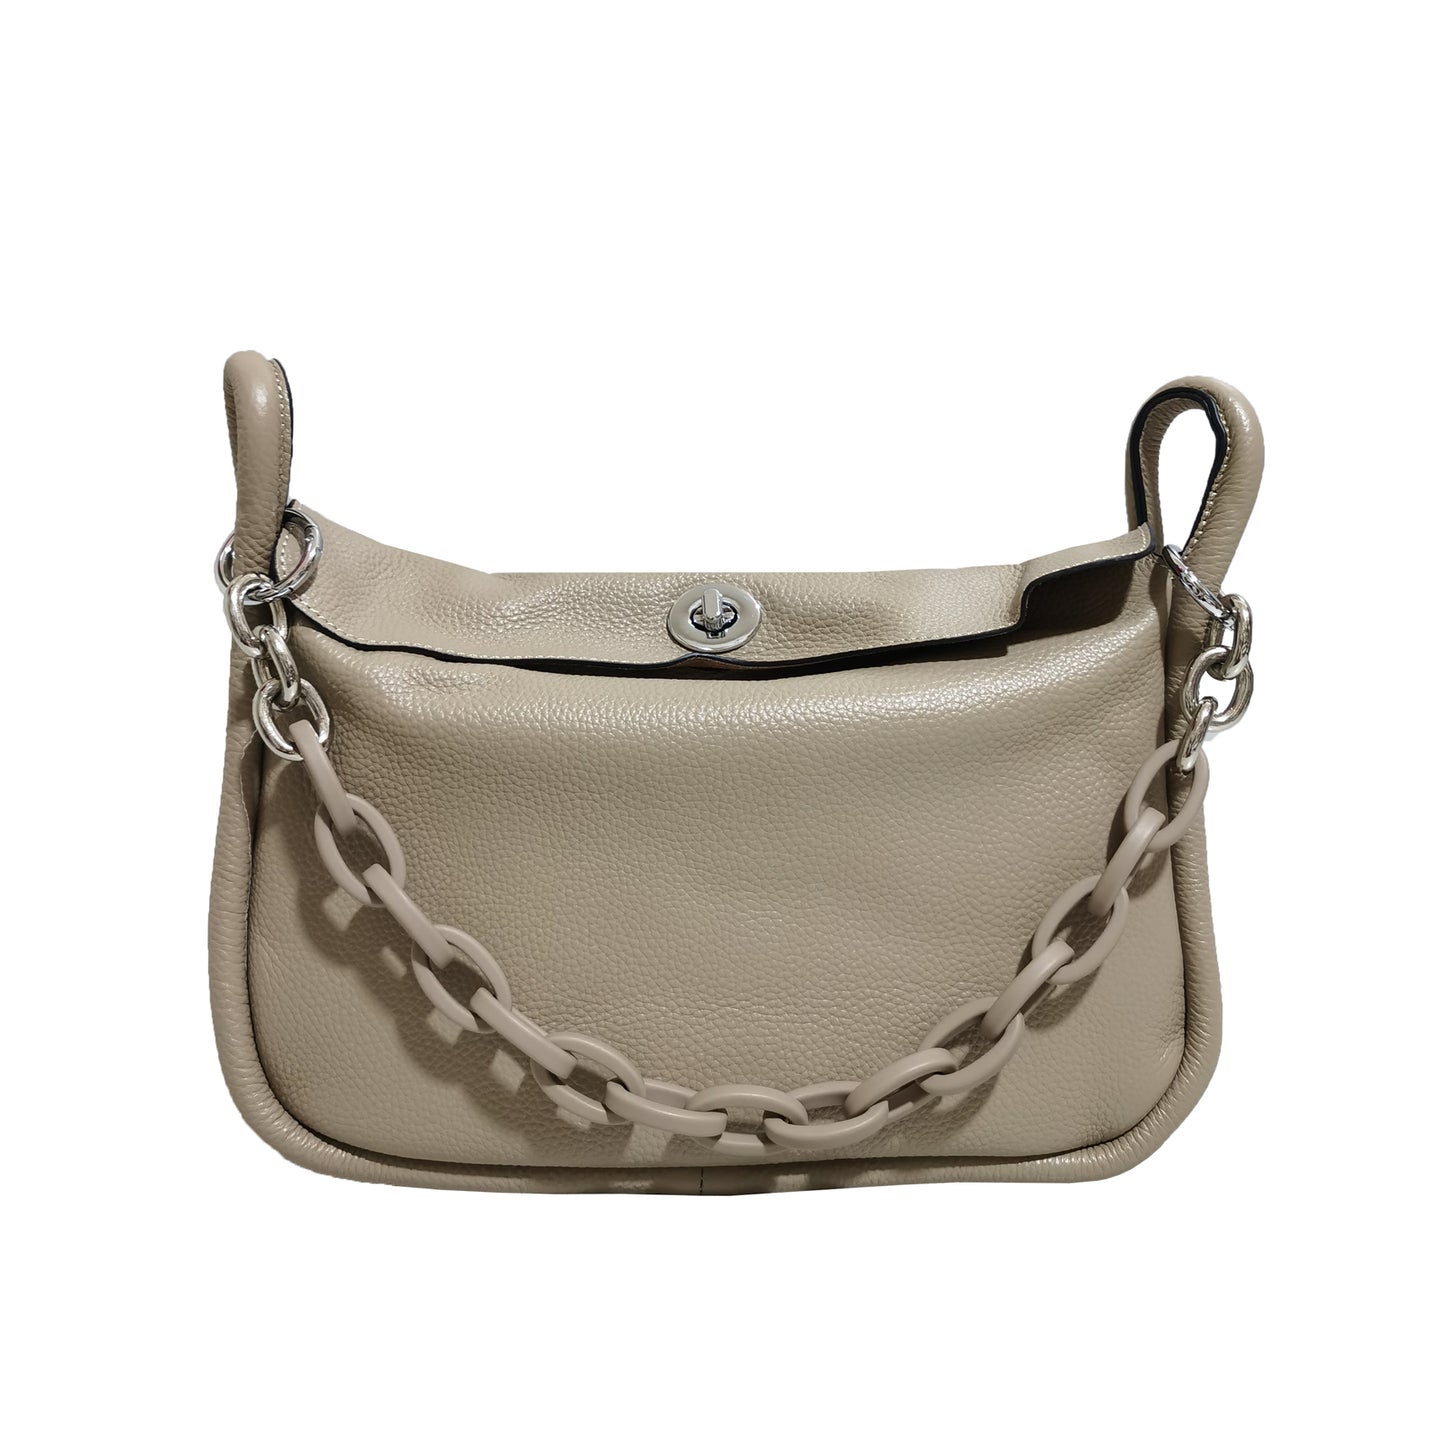 Women's genuine cowhide leather handbag Two Handle Chain design with two removable strap by Tomorrow Closet